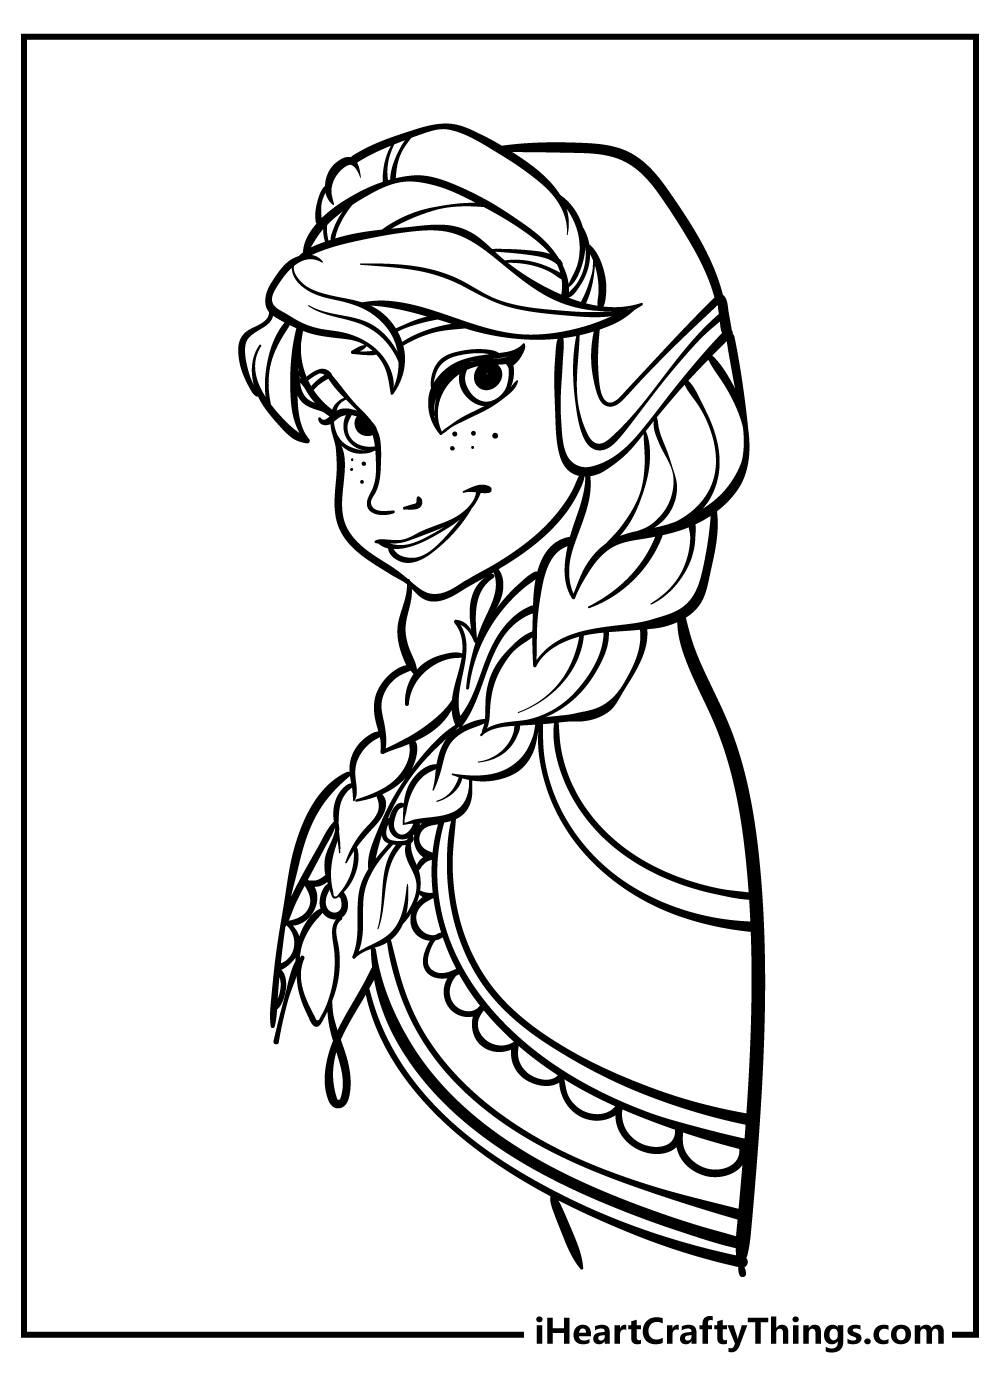 Elsa and Anna coloring pages free printable